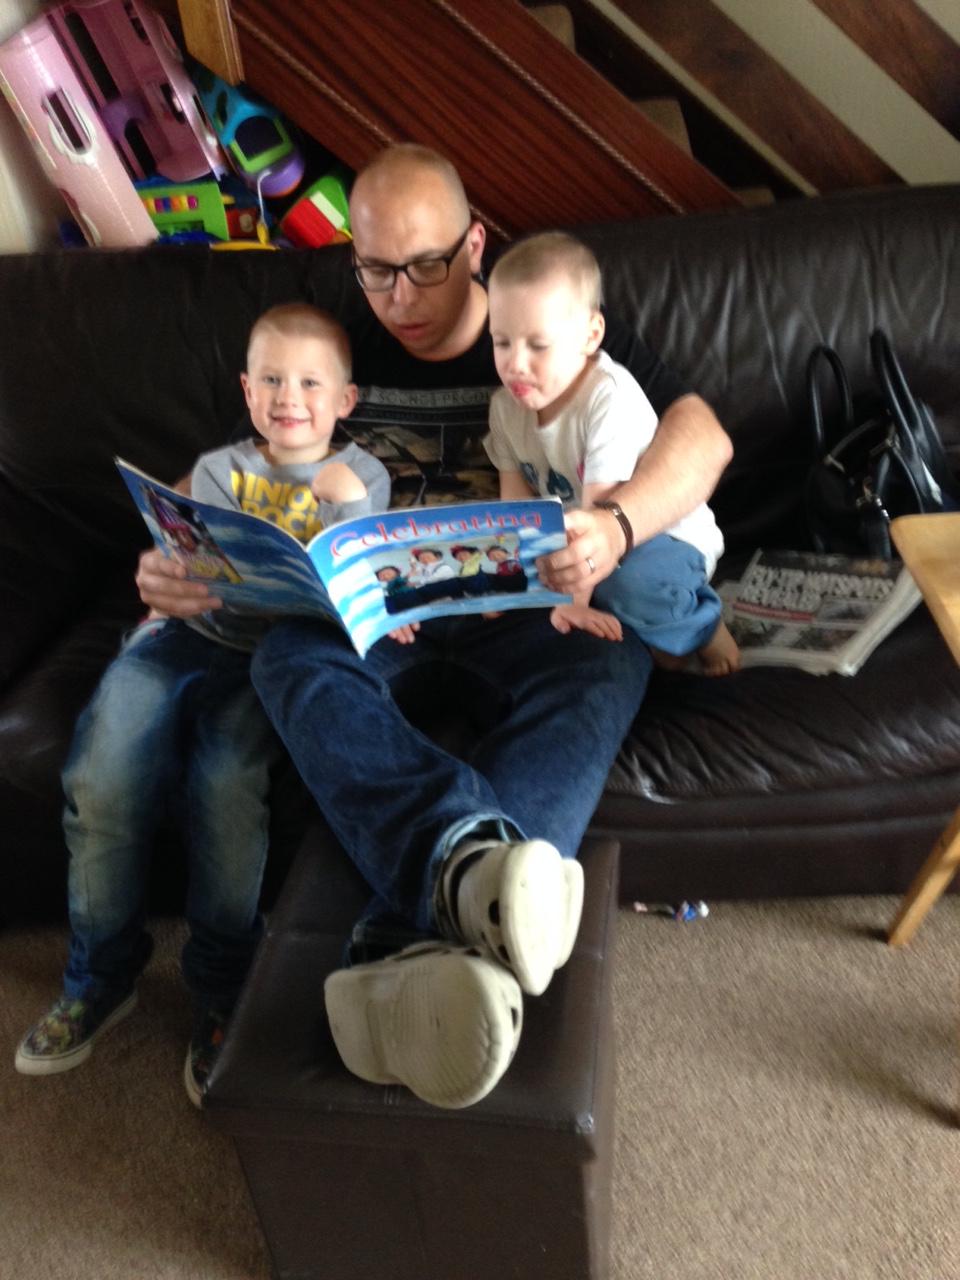 David Clough reading to his sons Dylan, aged 6, and Noah, aged 4. Their favourite book is The Gruffulo by Julia Donaldson.